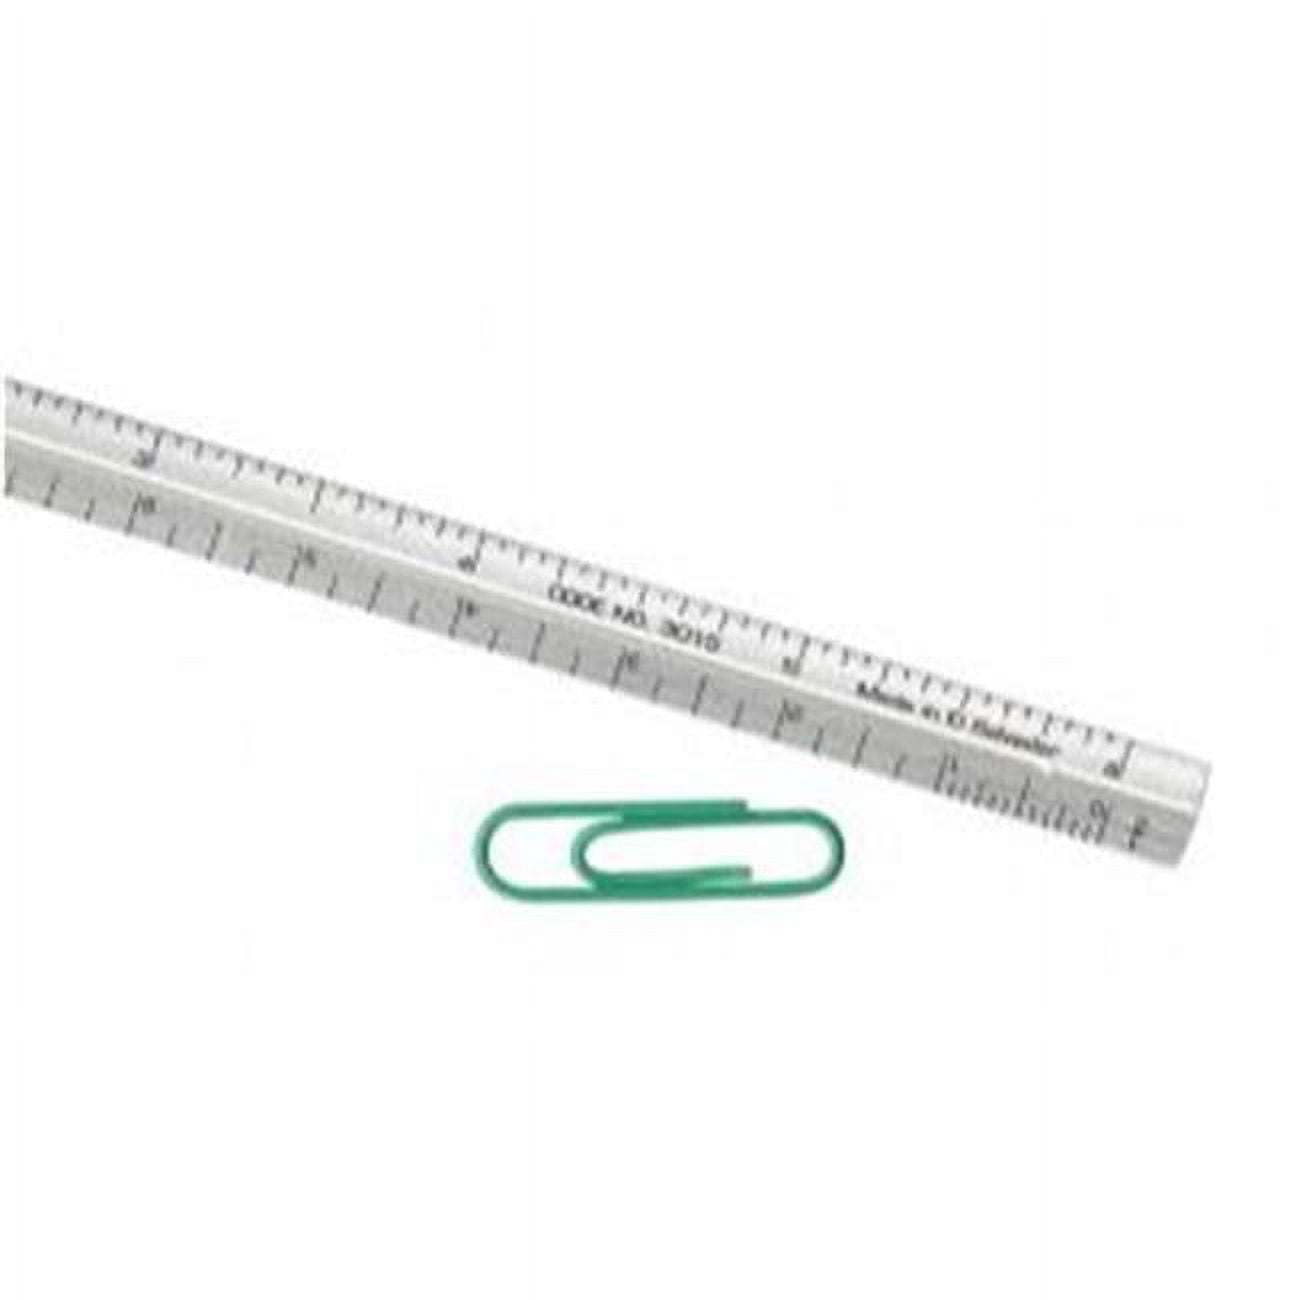 Alumicolor 6 Select-a-Scale Engineer Drafting Ruler, Red - 7507-4-Promo